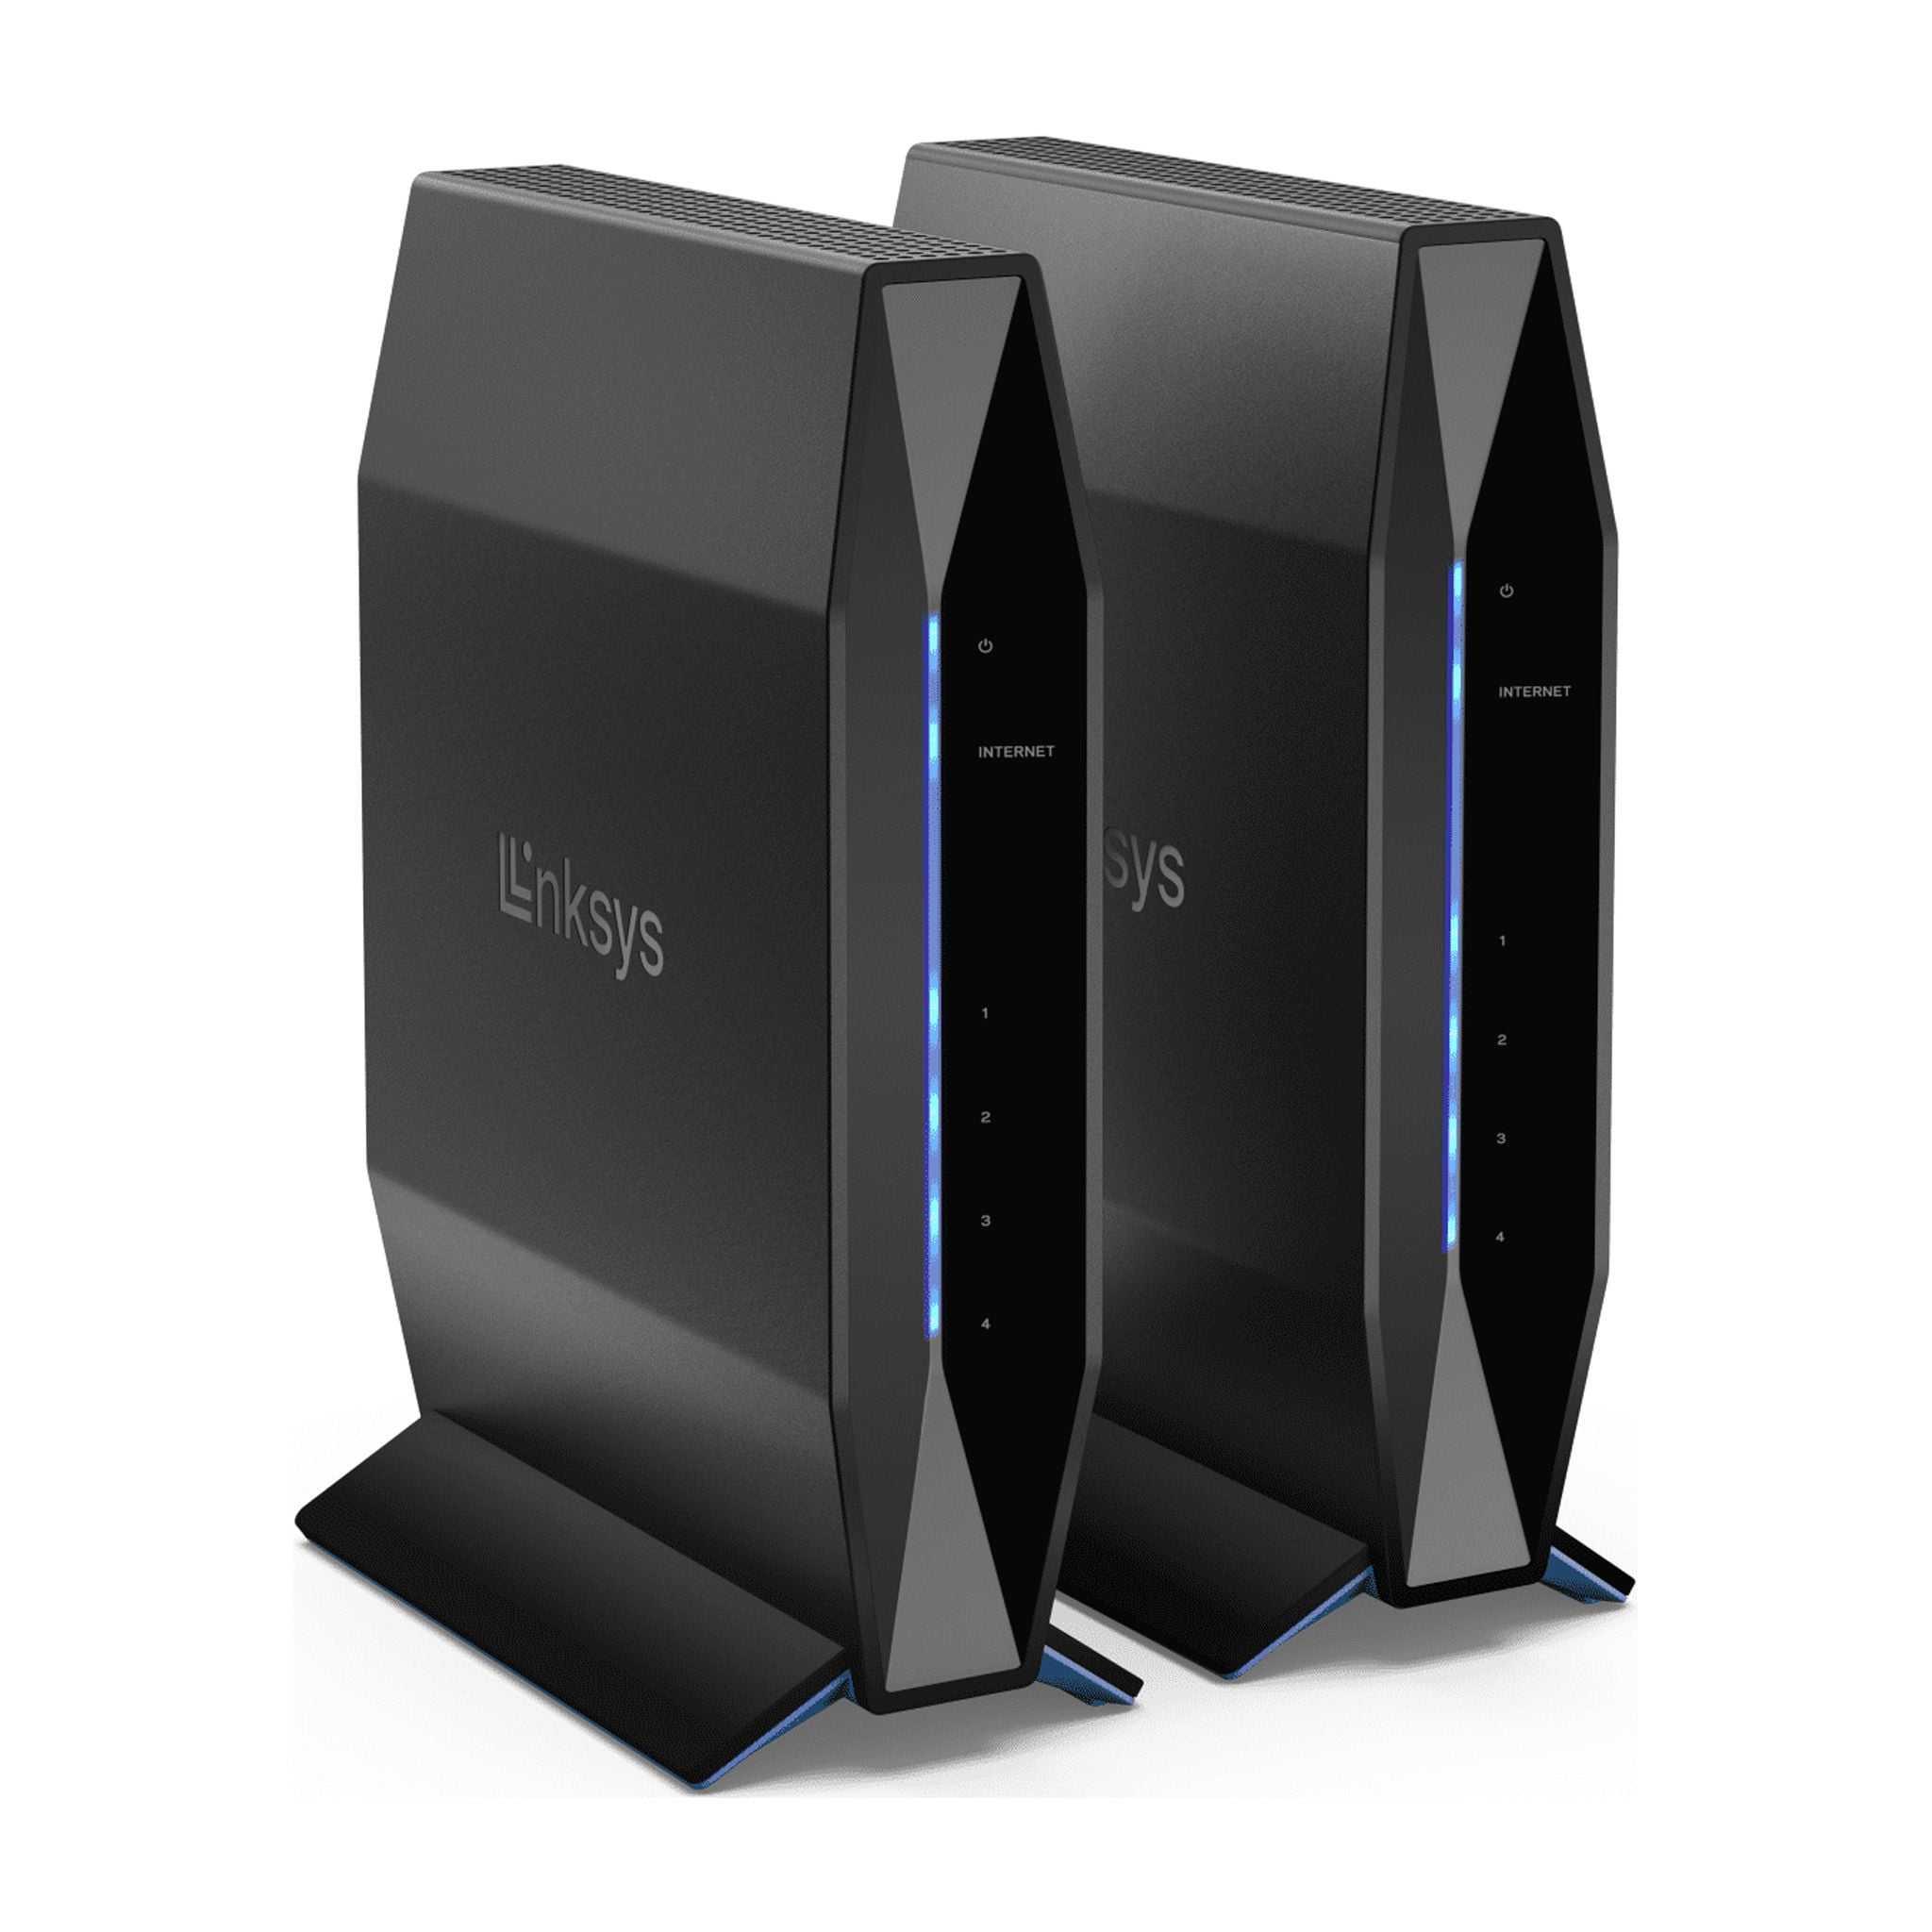 TP-Link Wi-Fi 6 Mesh Router Replacement System, 3- AX1500 Mesh Routers, Coverage up to 5,600 Sq. ft., Parental Controls, Connect up to 120  devices